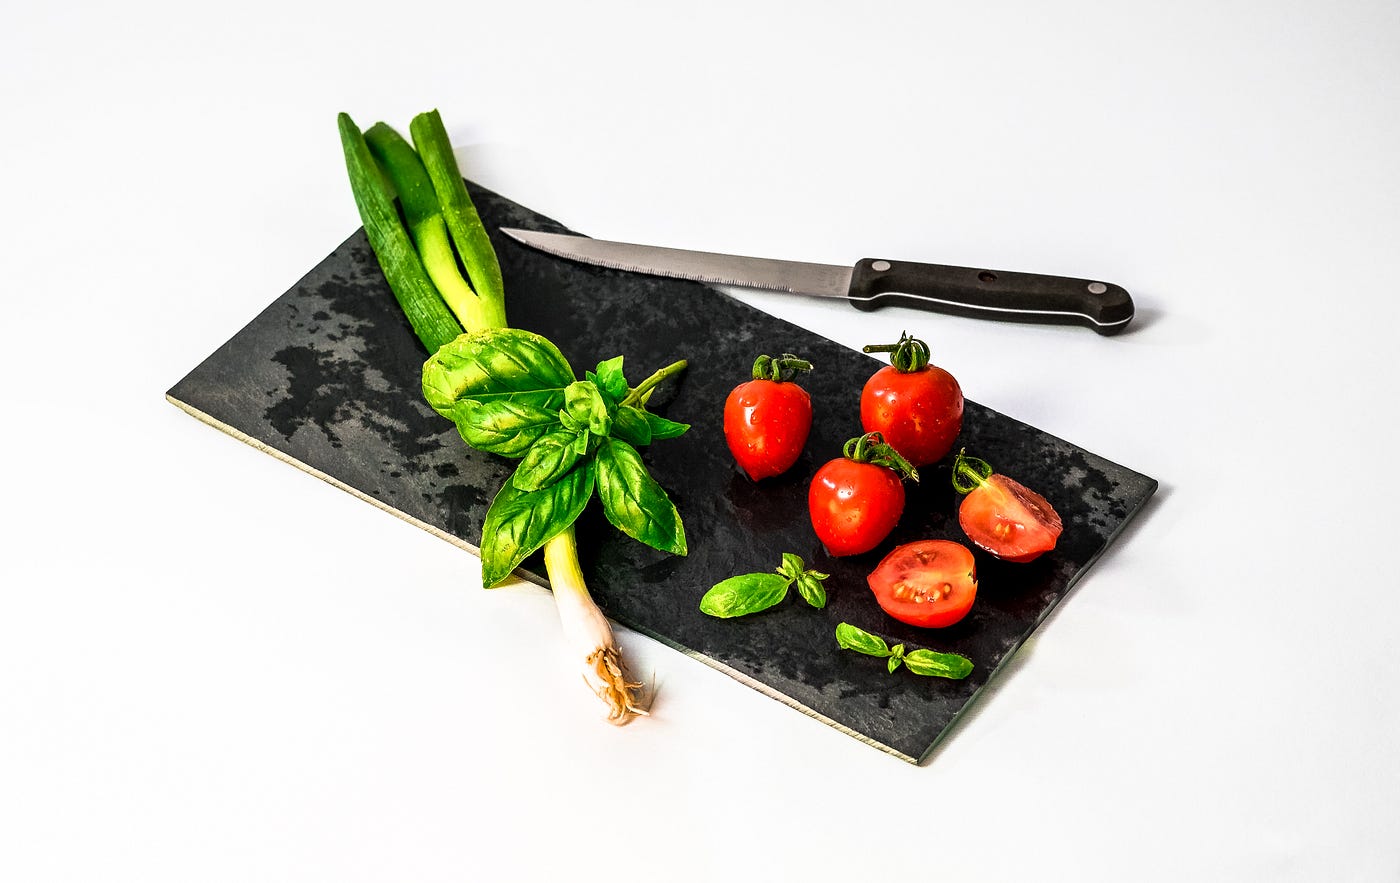 Cutting board (black), with 6 tomatoes and some vegetables. A knife sits on the edge of the small cutting board. New research suggests that a Mediterranean diet may help those with depression.